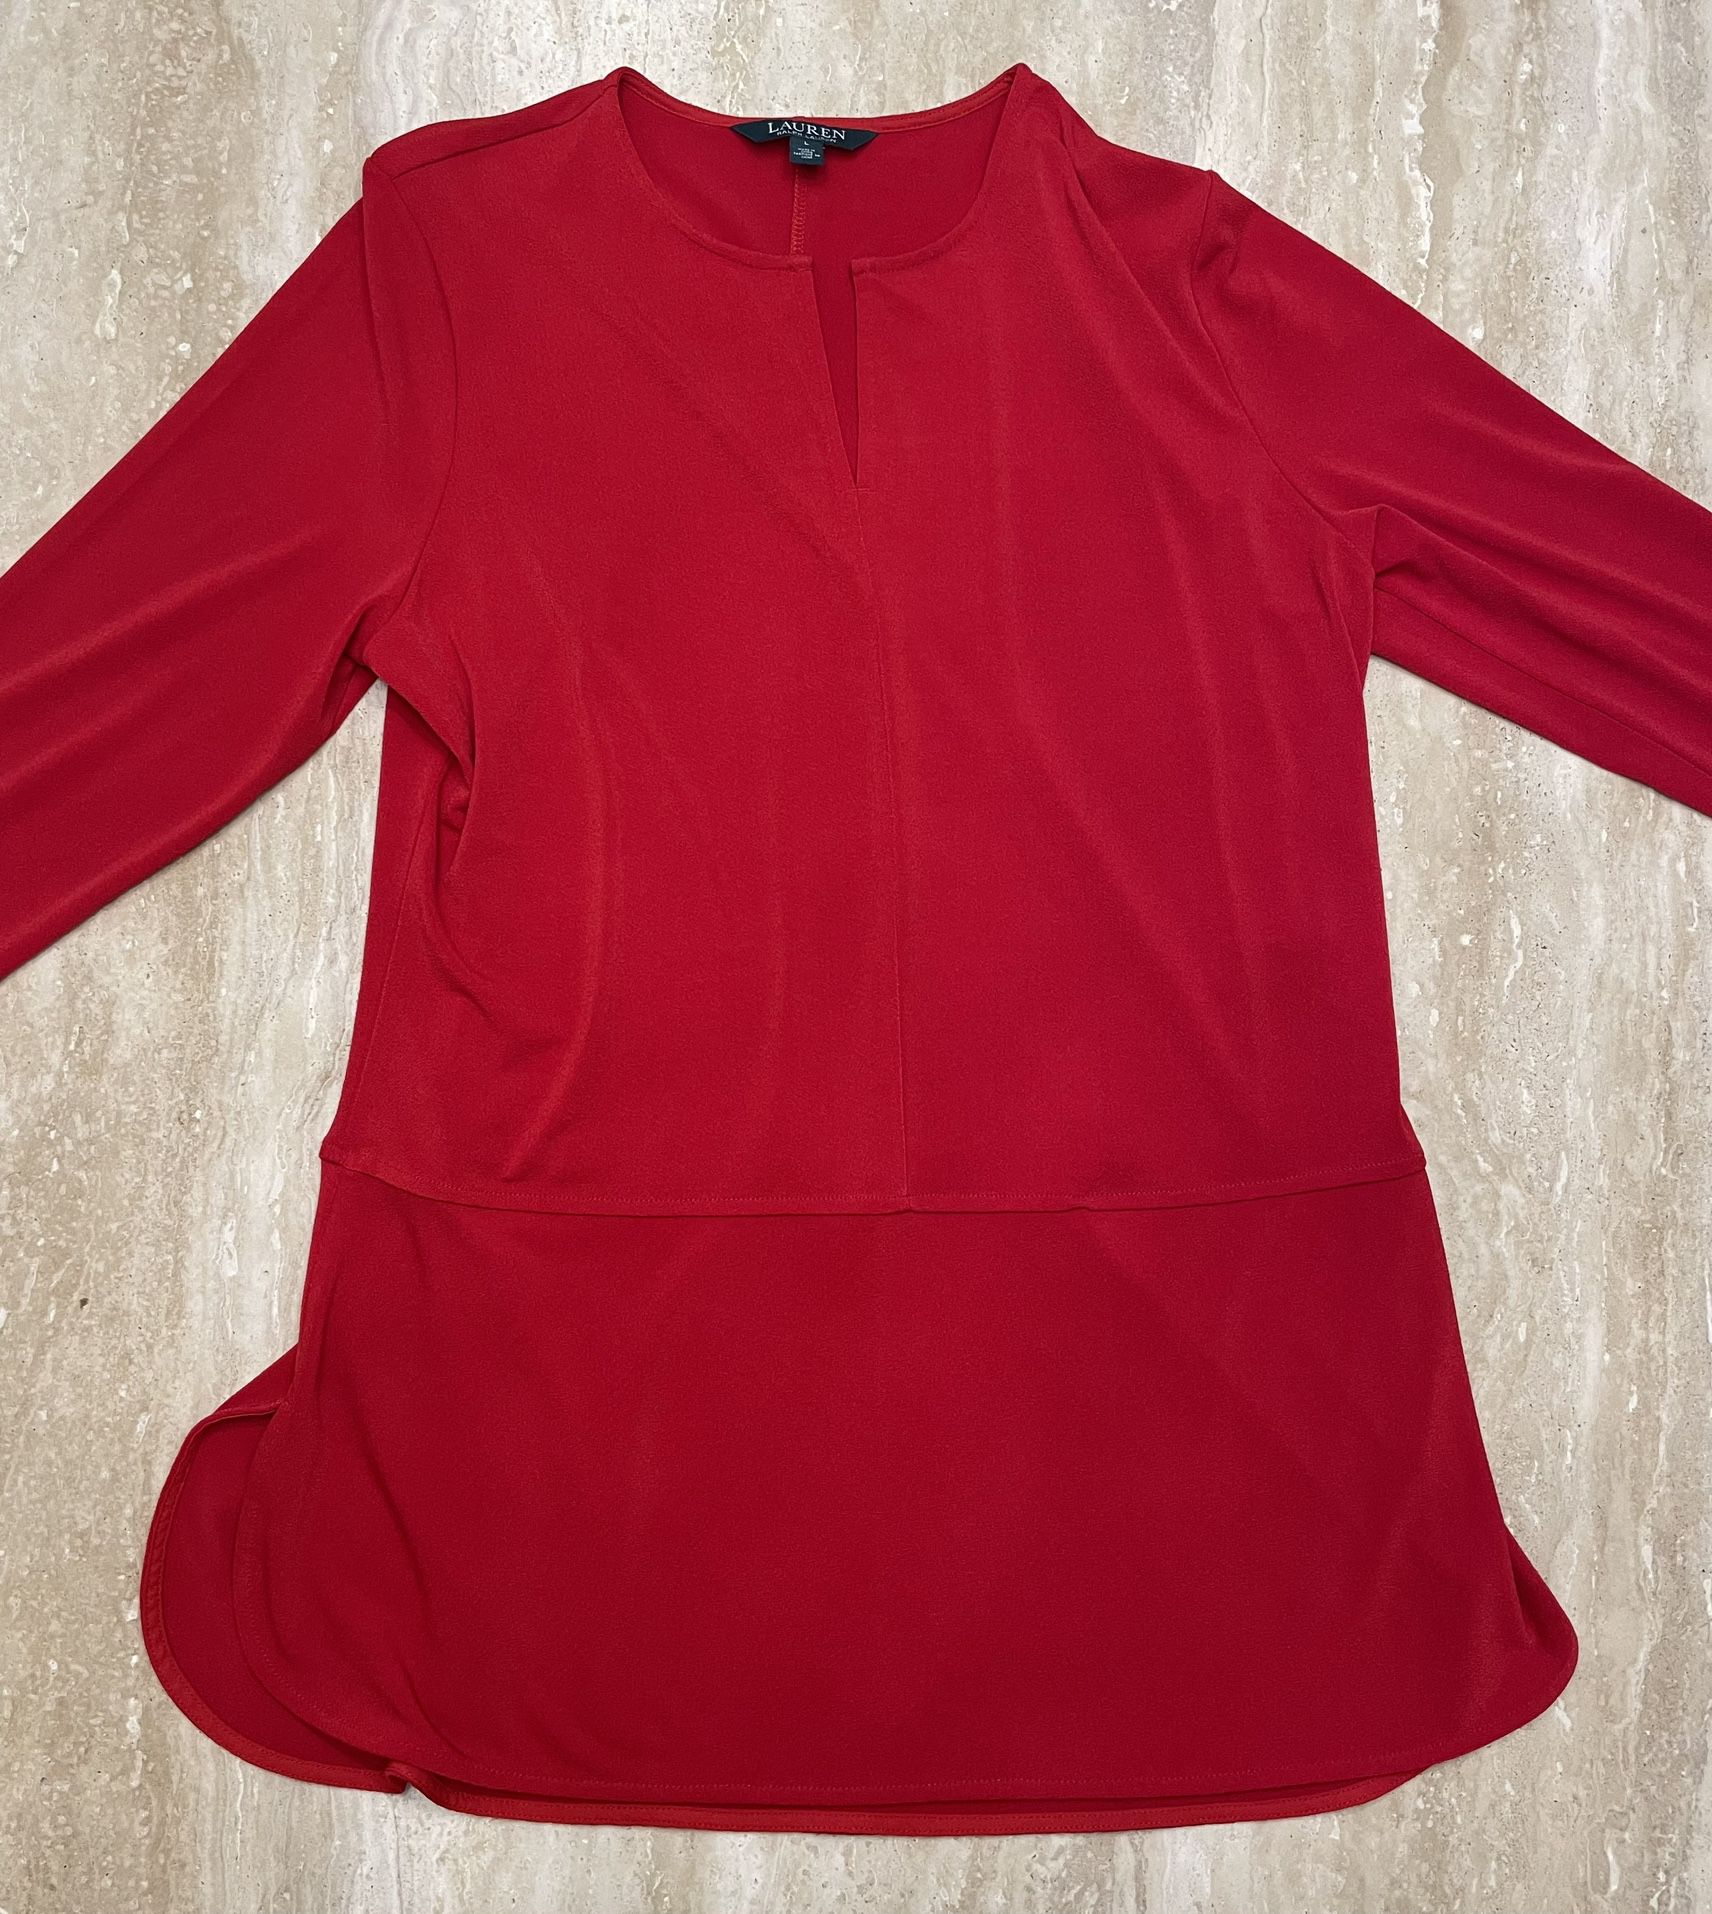 Ralph Lauren Red Stretchy Tunic